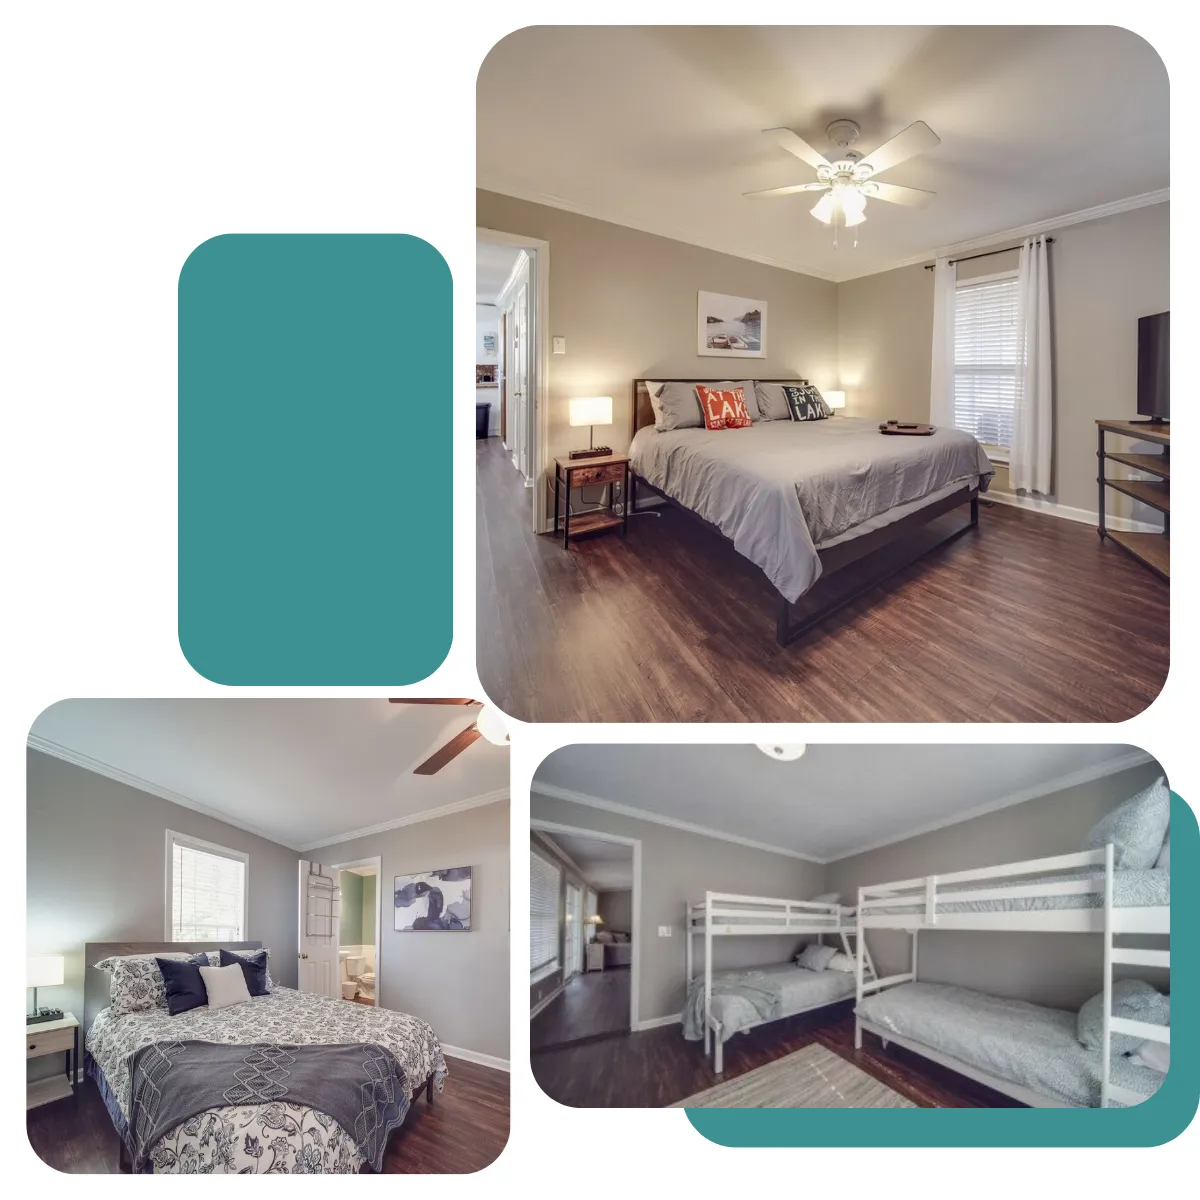 Lake Wylie Stay: Two cozy queen bedrooms with private baths, plus a bunk room and convenient half bath nearby.